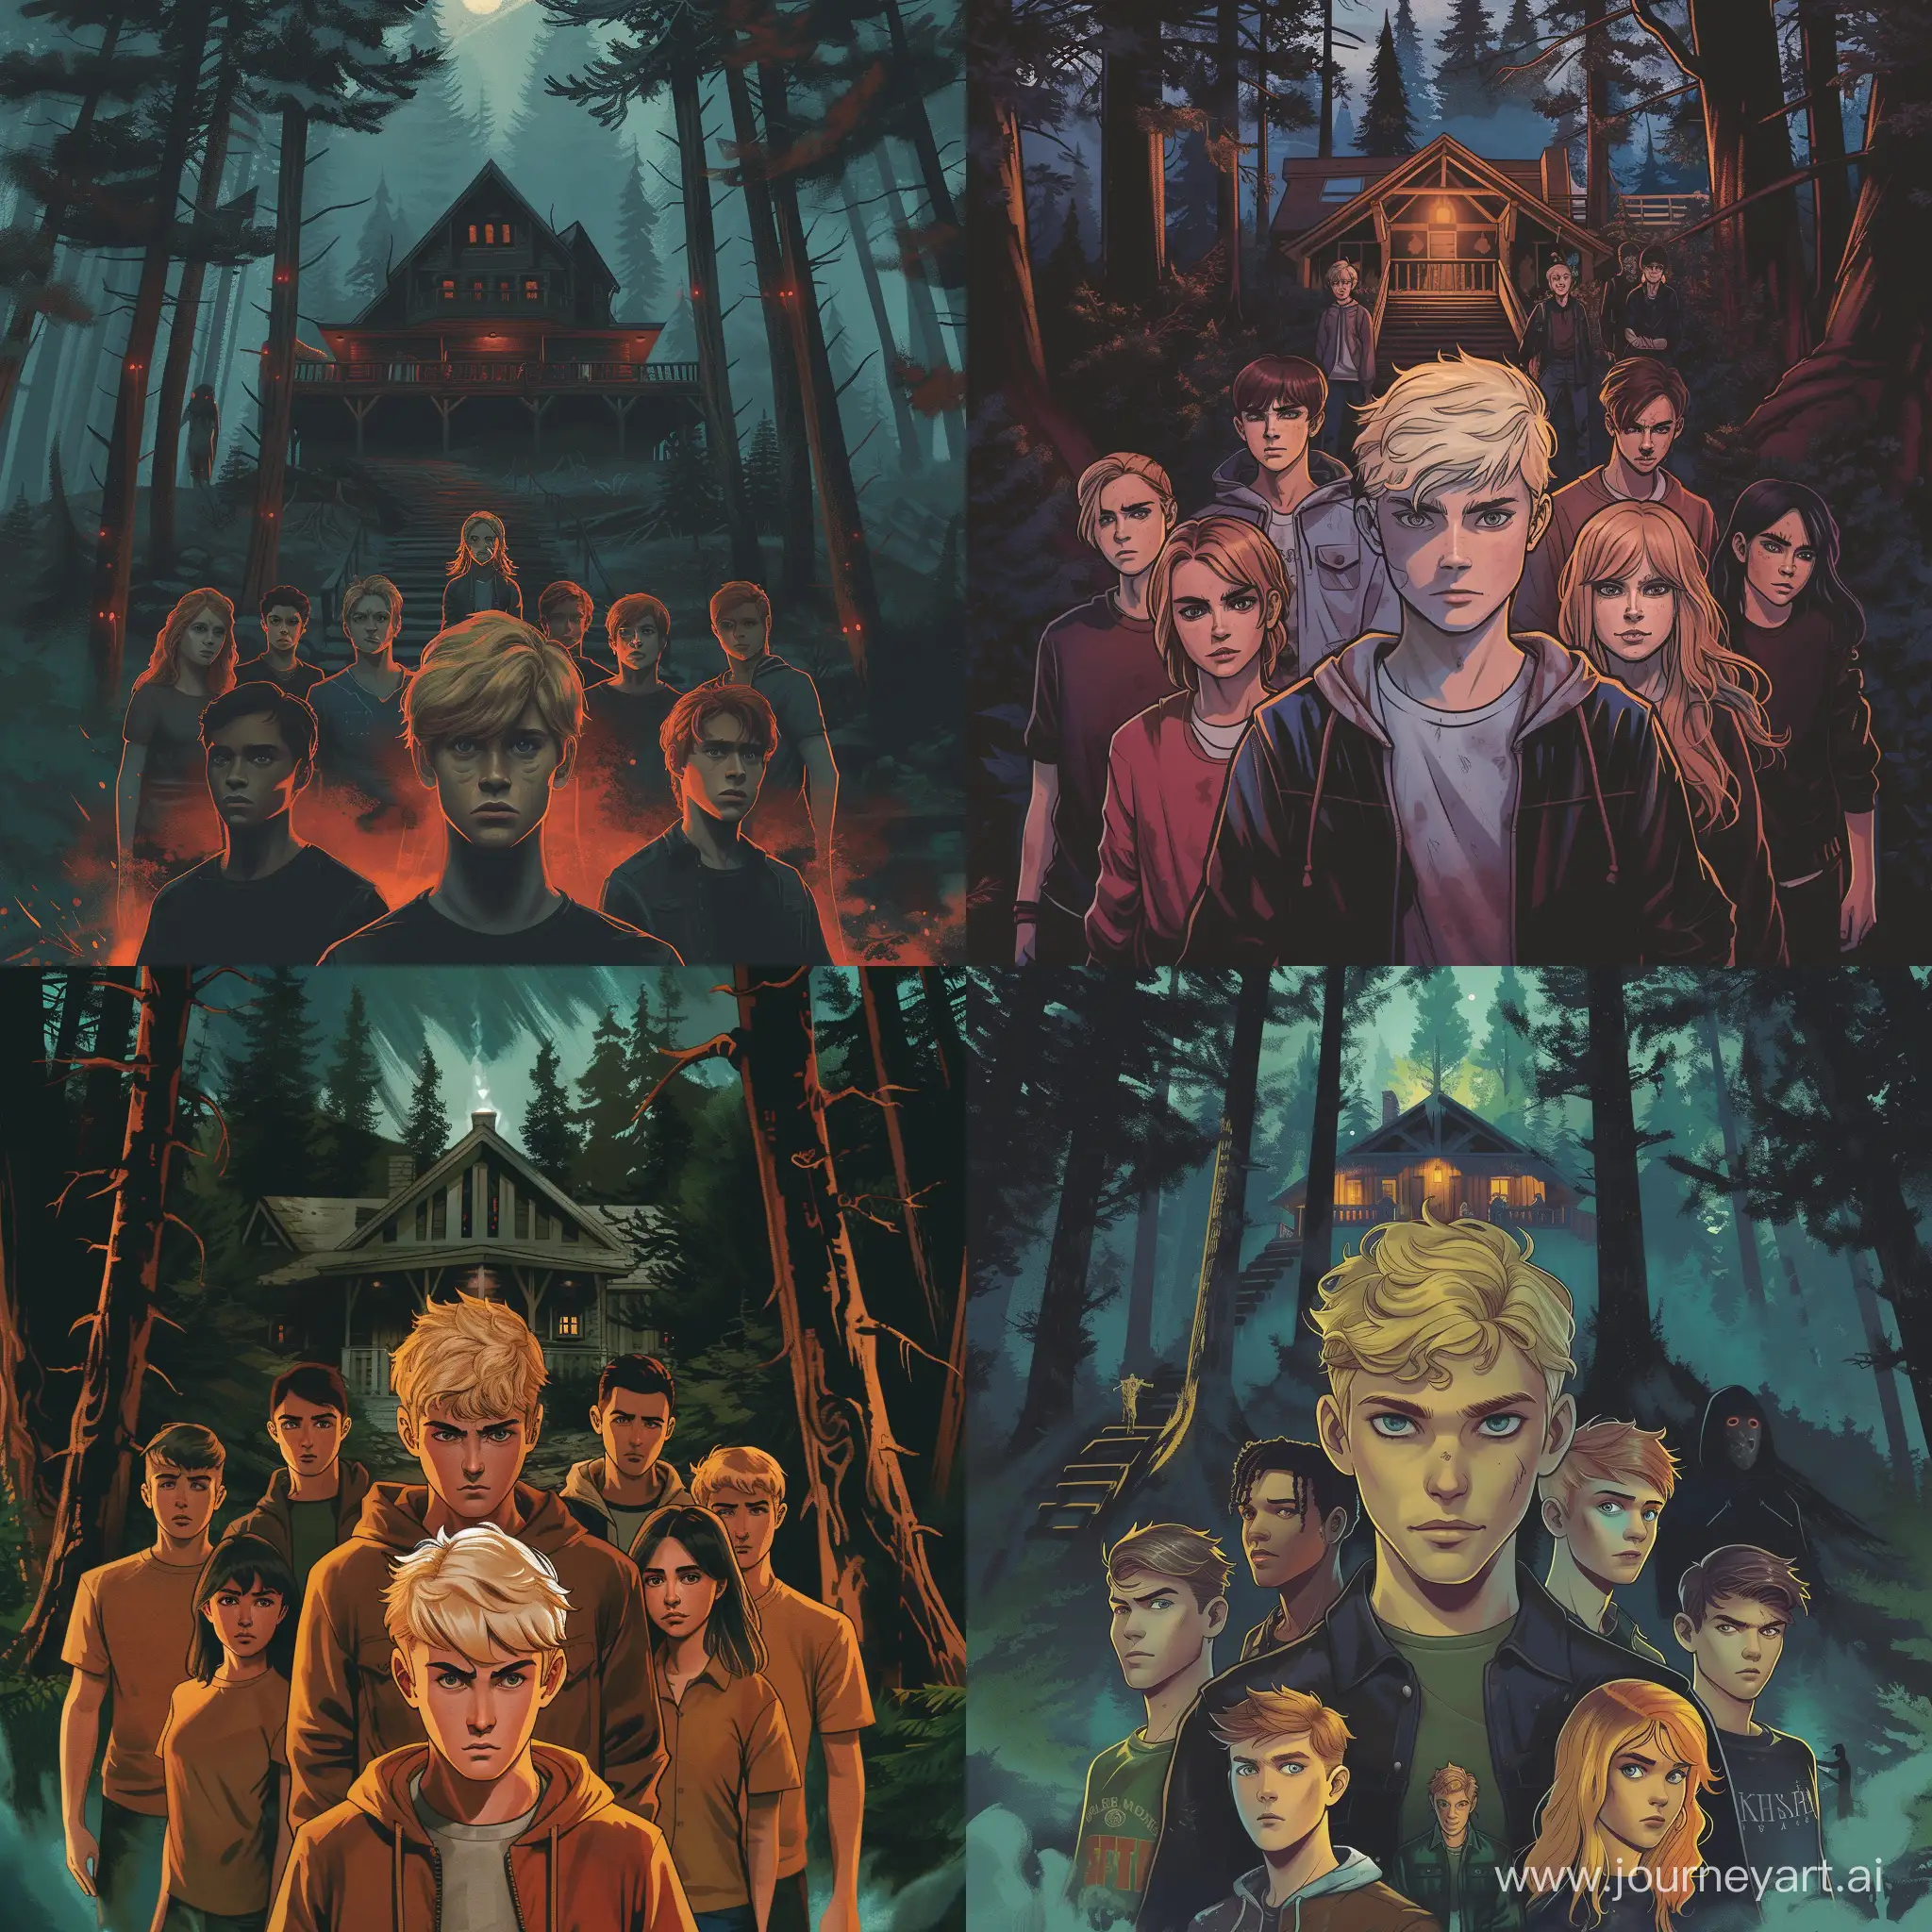 a cover for a book, horror, aesthetic, 11 friends, teenagers, six boys, five girls, forest, a lodge at the background, night, one boy in the middle with blonde hair